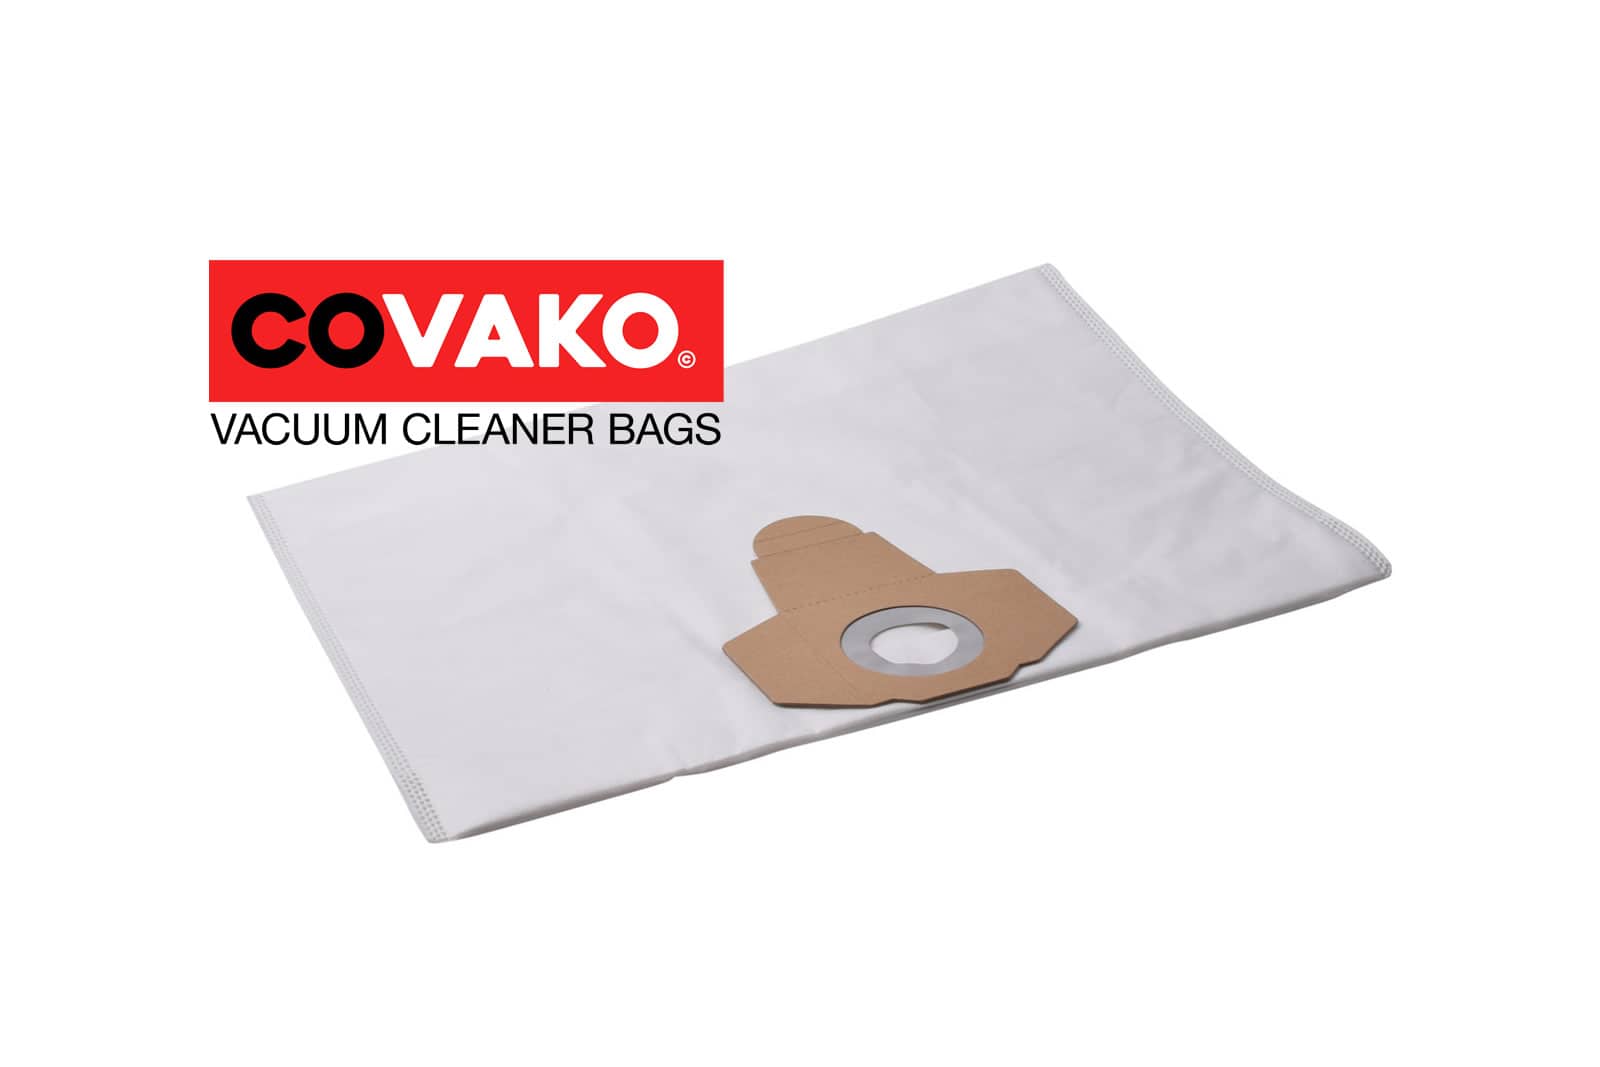 Einhell TE-VC 1820 / Synthesis - Einhell vacuum cleaner bags